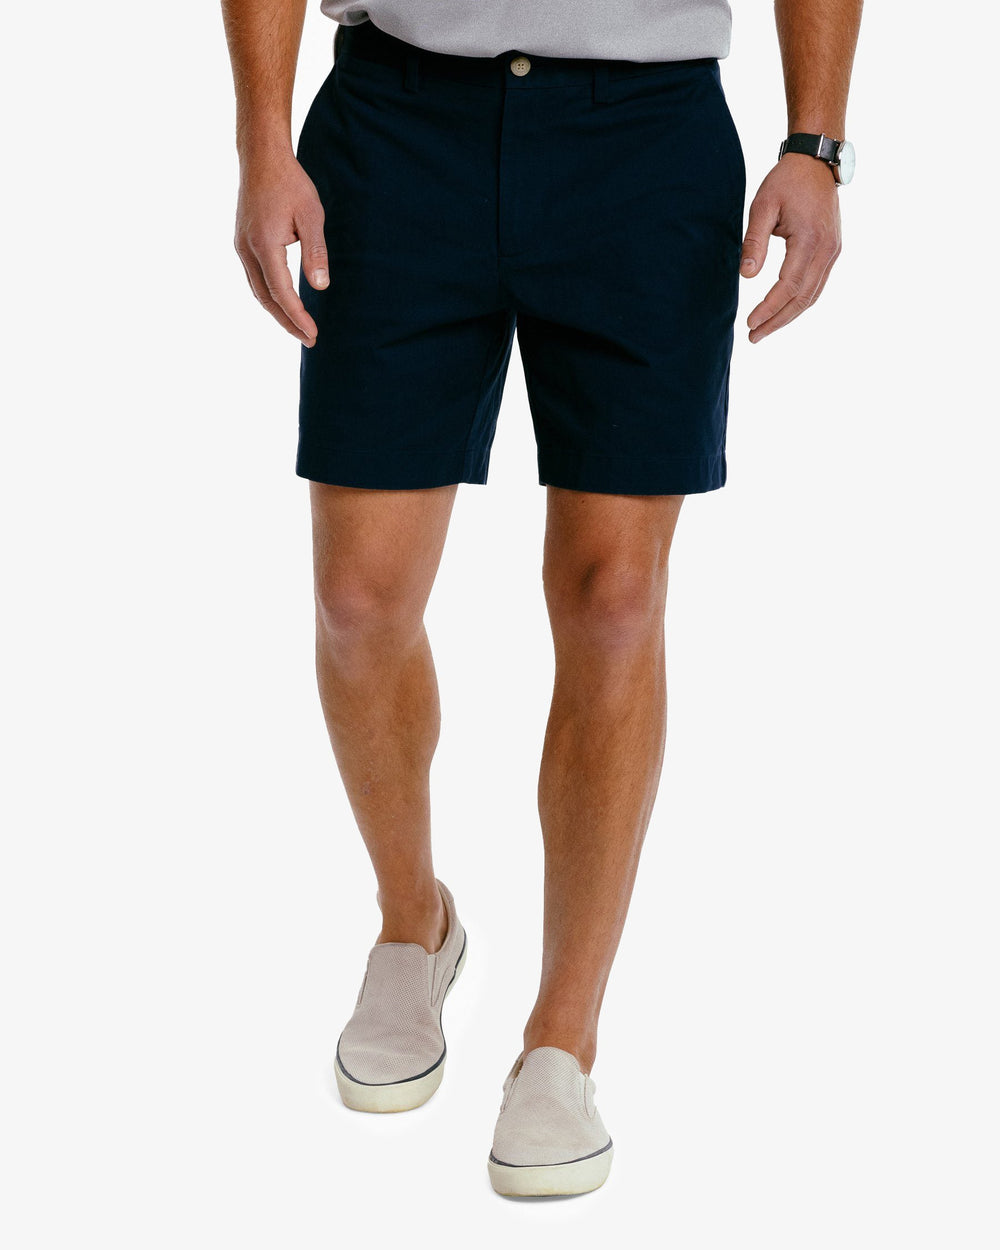 The front view of the Men's New Channel Marker 9 Inch Short by Southern Tide - True Navy